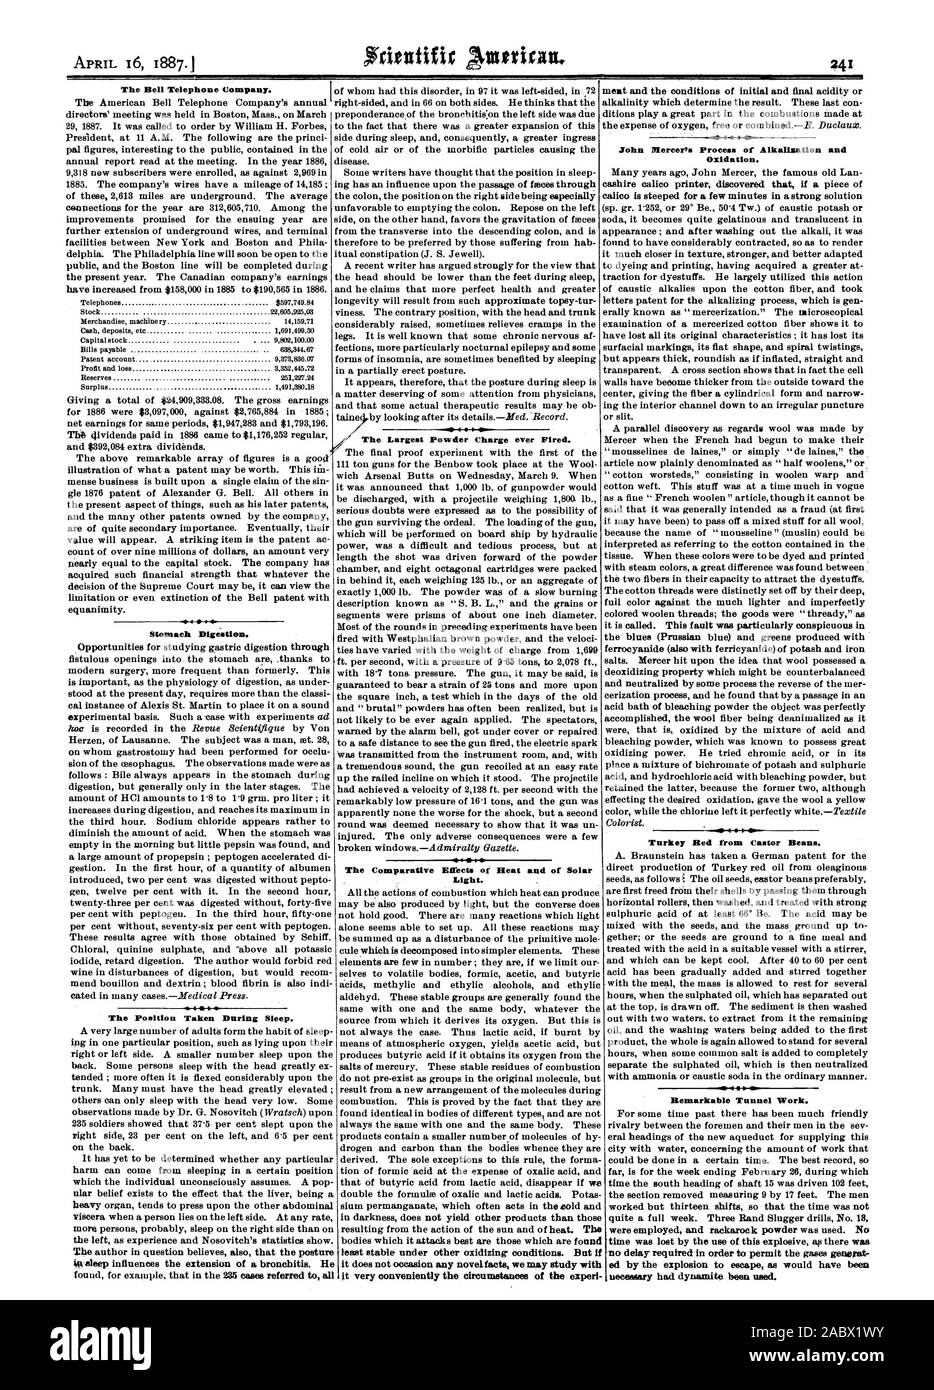 quite a full week. Three Rand Slugger drills No. 18 were employed and rackarock powder was used. N time was lost by the use of this explosive as there was no- delay required in order to permit the gases generat ed by the explosion to escape as would have been necessary had dynamite been wed., scientific american, 1887-04-16 Stock Photo